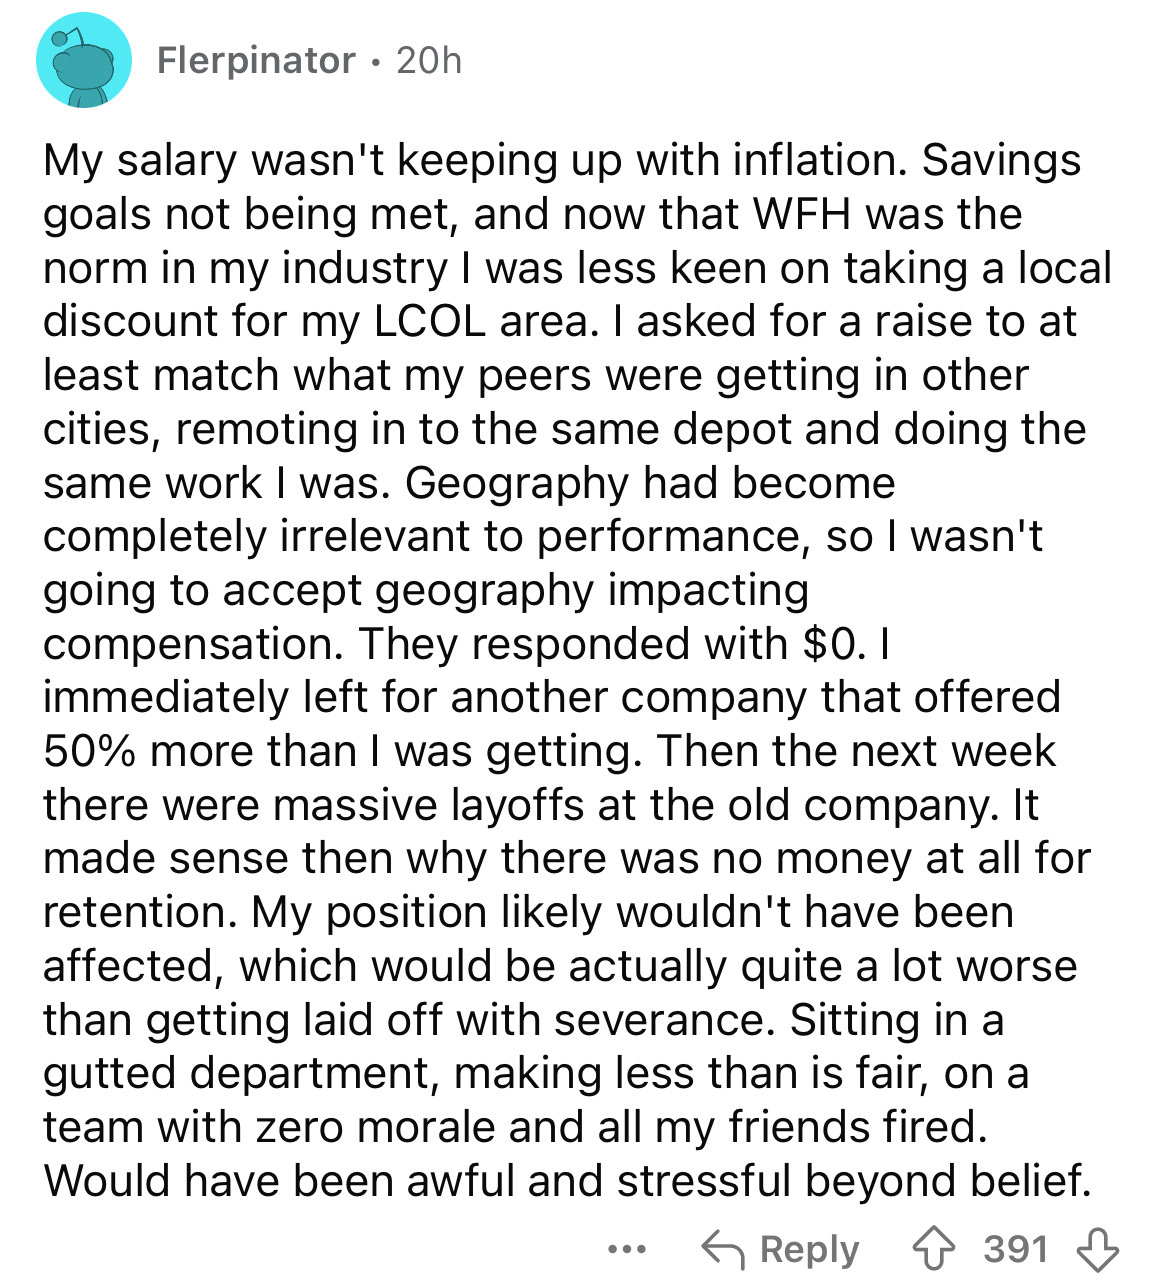 document - Flerpinator 20h My salary wasn't keeping up with inflation. Savings goals not being met, and now that Wfh was the norm in my industry I was less keen on taking a local discount for my Lcol area. I asked for a raise to at least match what my pee